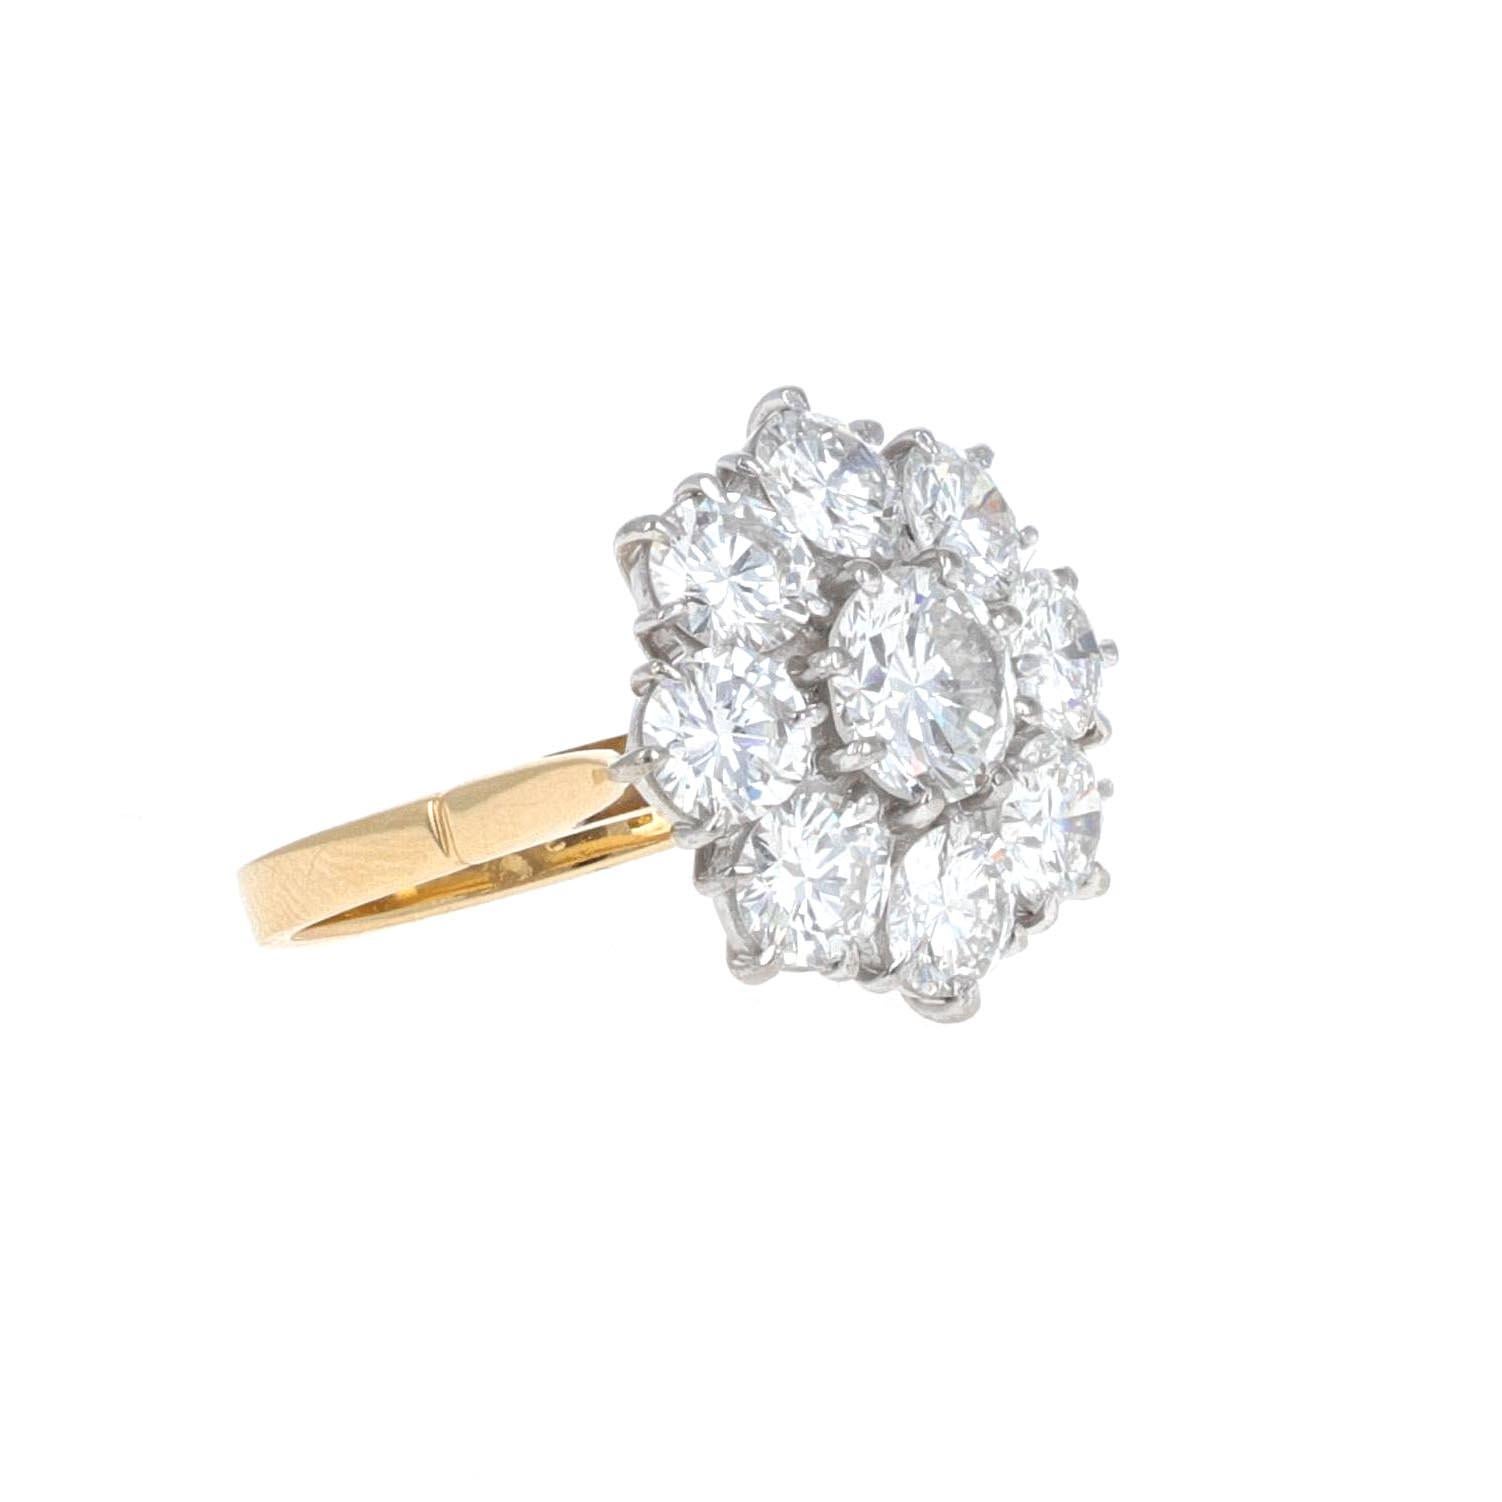 18 karat white and yellow gold art deco style cocktail ring. The ring is made with white, eye clean, round brilliant diamonds, The center diamond is an estimated 1 carat. There are 8 diamonds surrounding the center that weigh an estimated total of